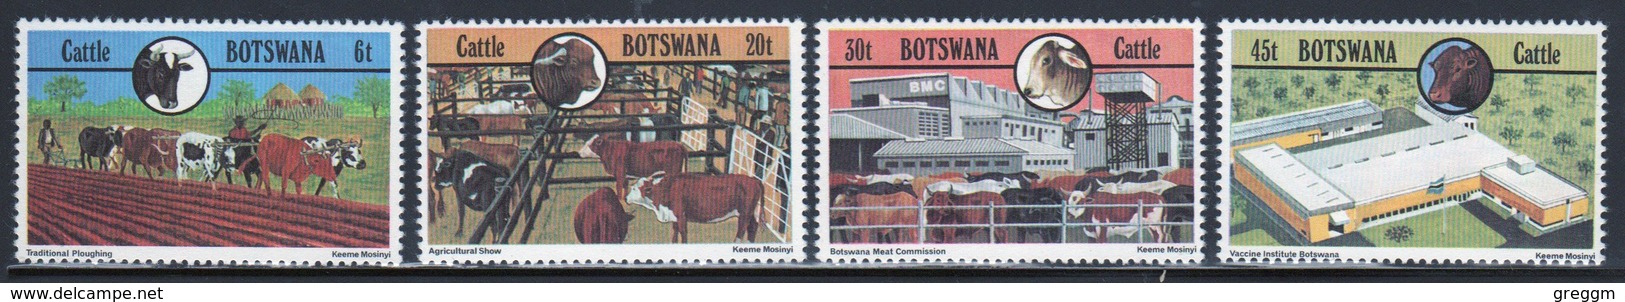 Botswana Set Of Stamps From 1981 To Celebrate The Cattle Industry. - Botswana (1966-...)